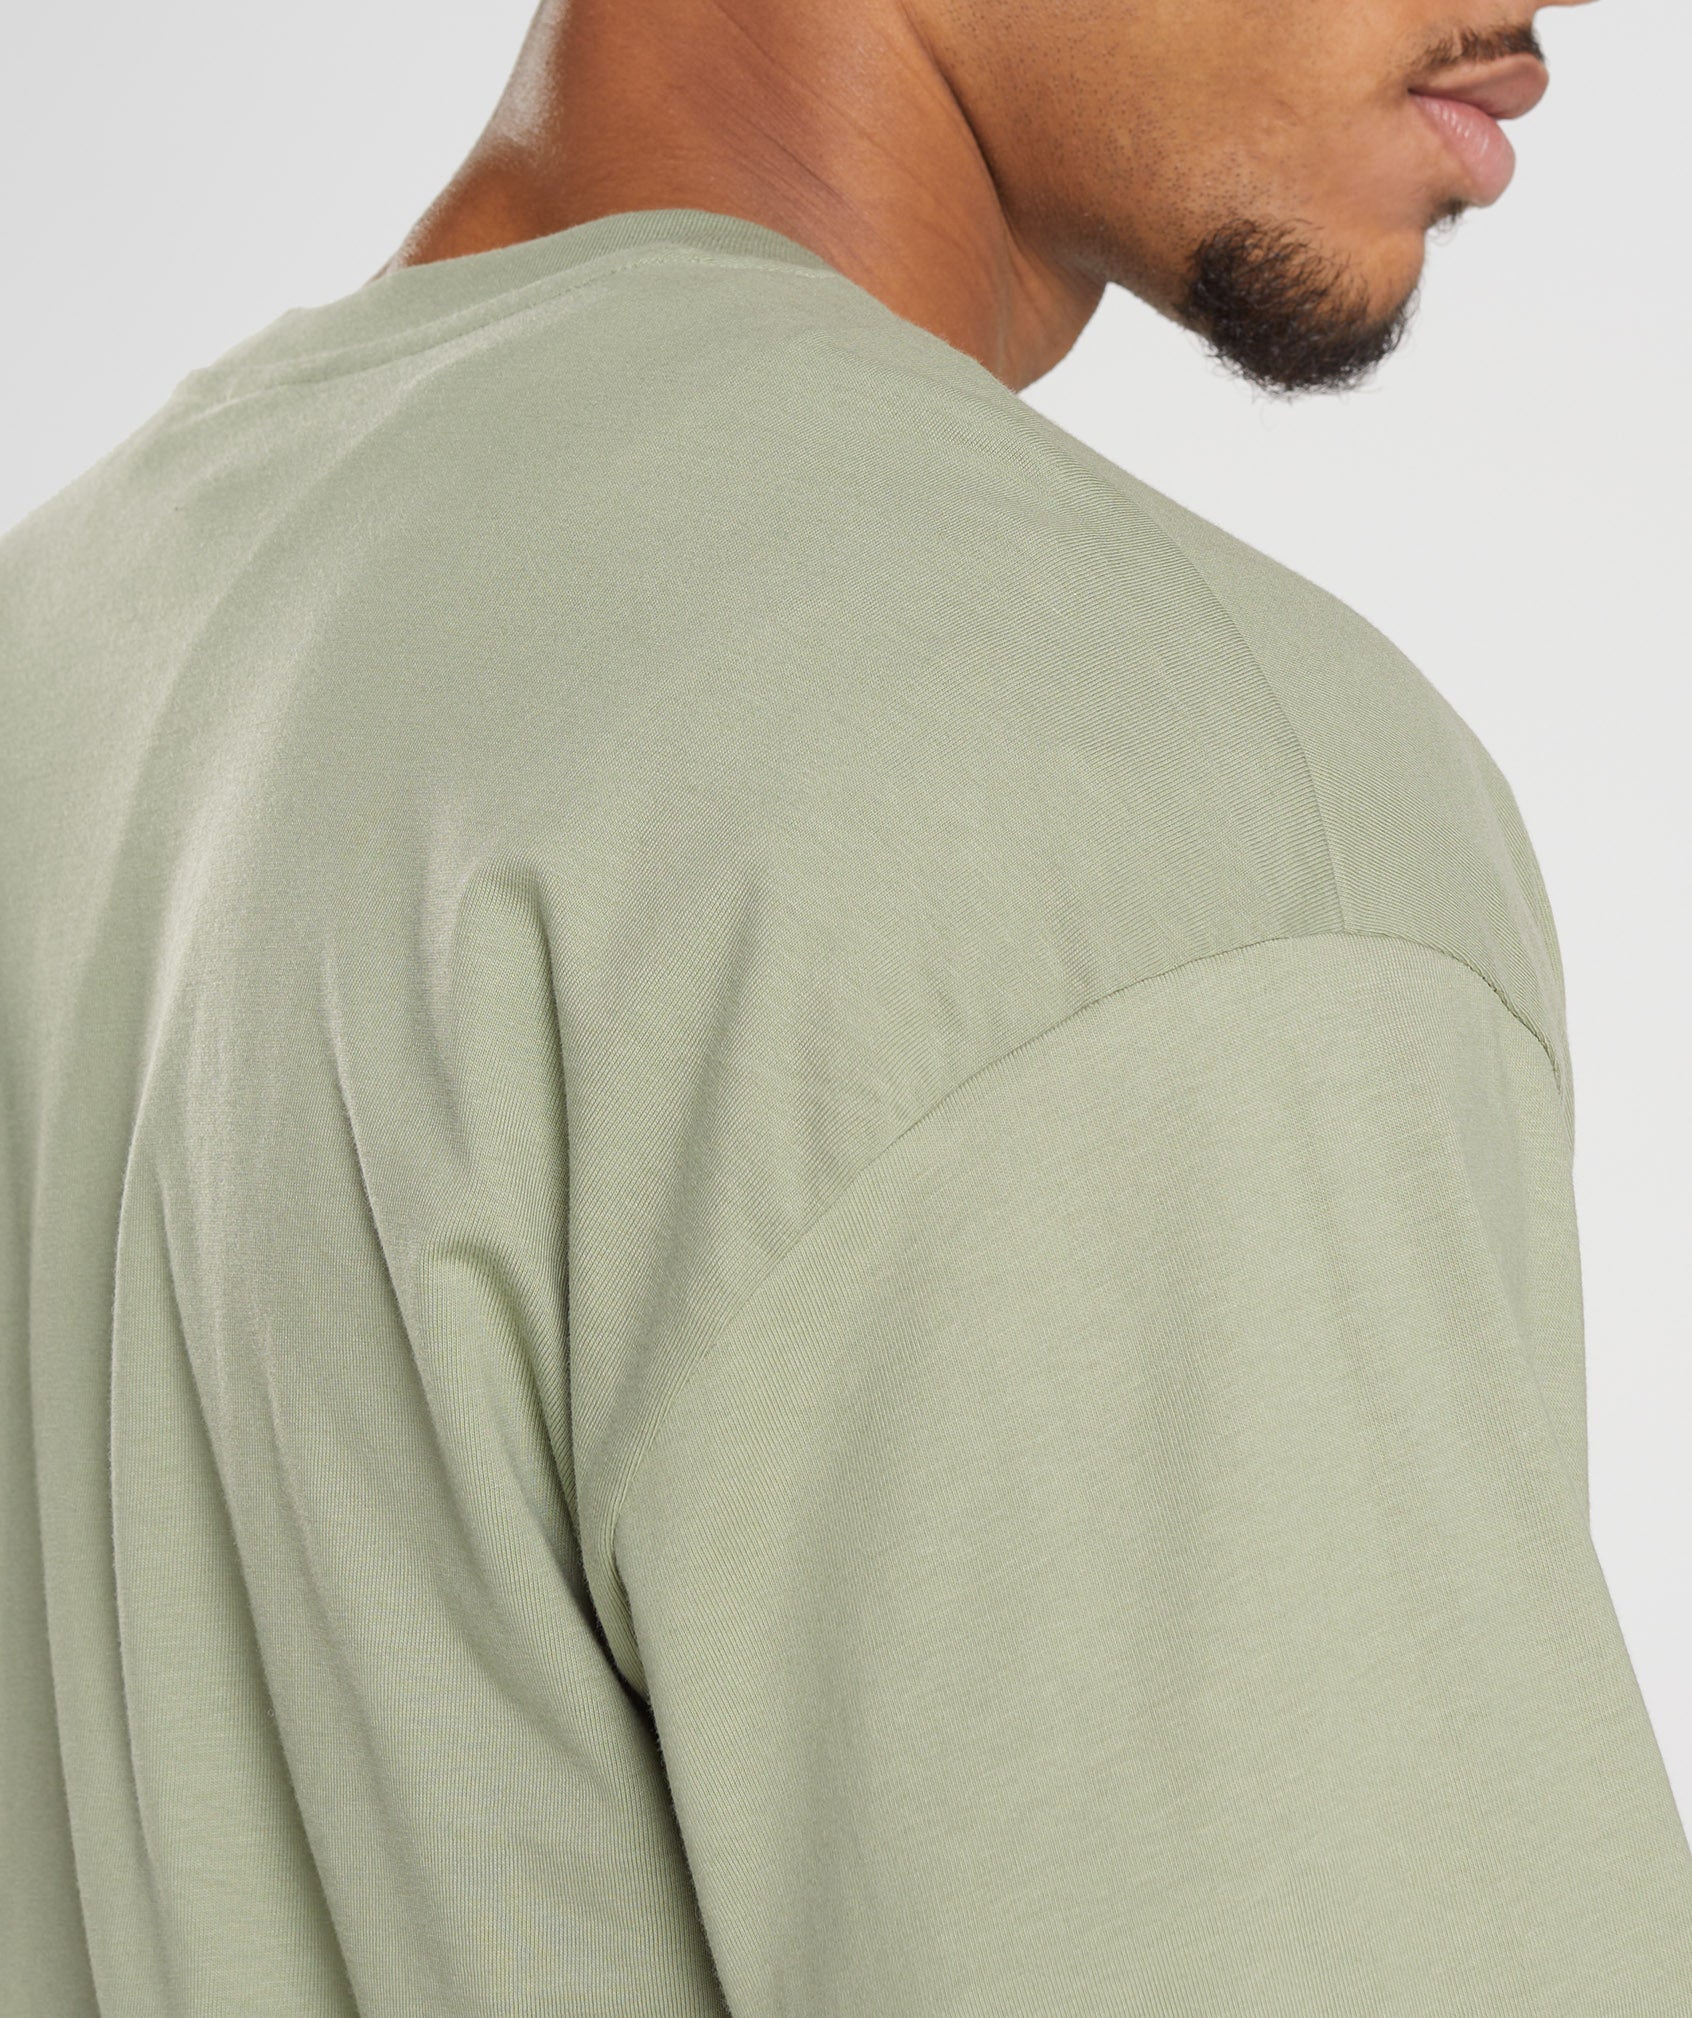 Rest Day Sweats Long Sleeve T-Shirt in Sage Green - view 7